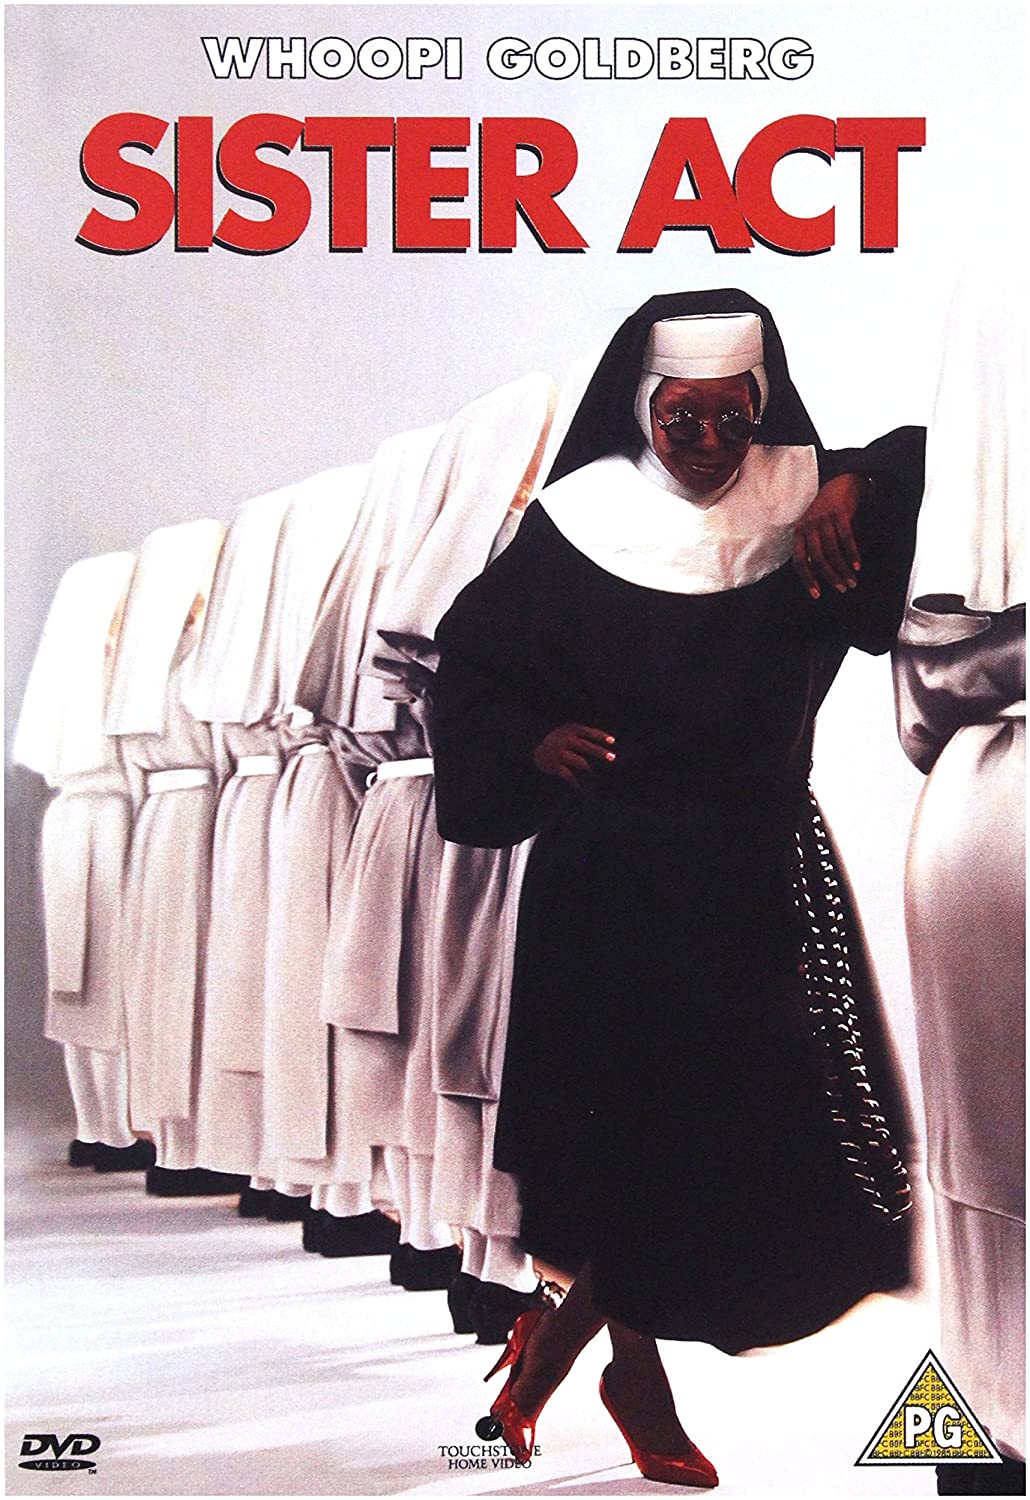 Sister Act [1992] - Comedy/Music [DVD]